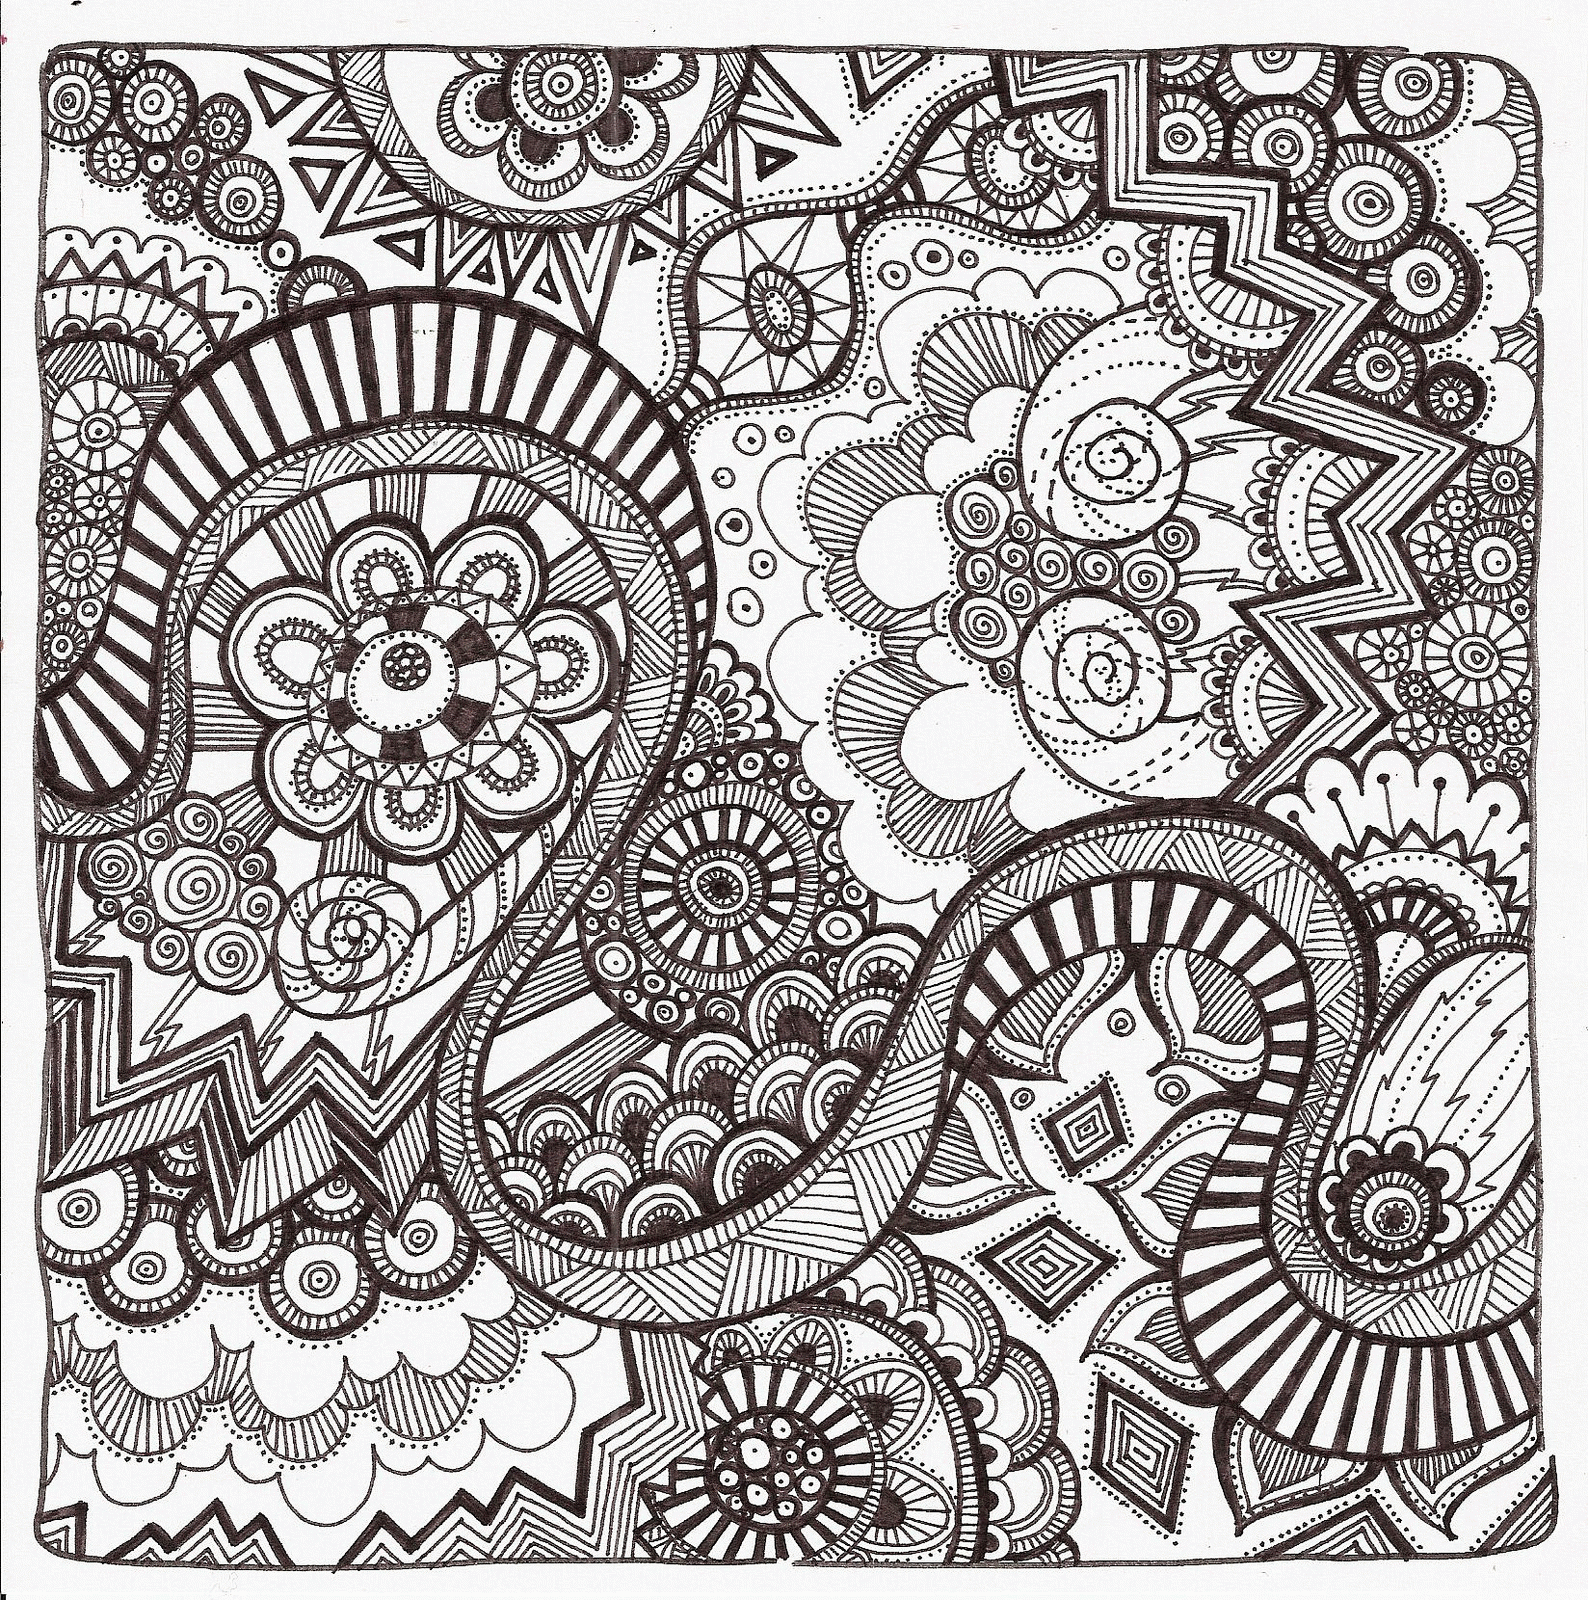 Free Zentangle Coloring Pages Download Free Zentangle Coloring Pages 